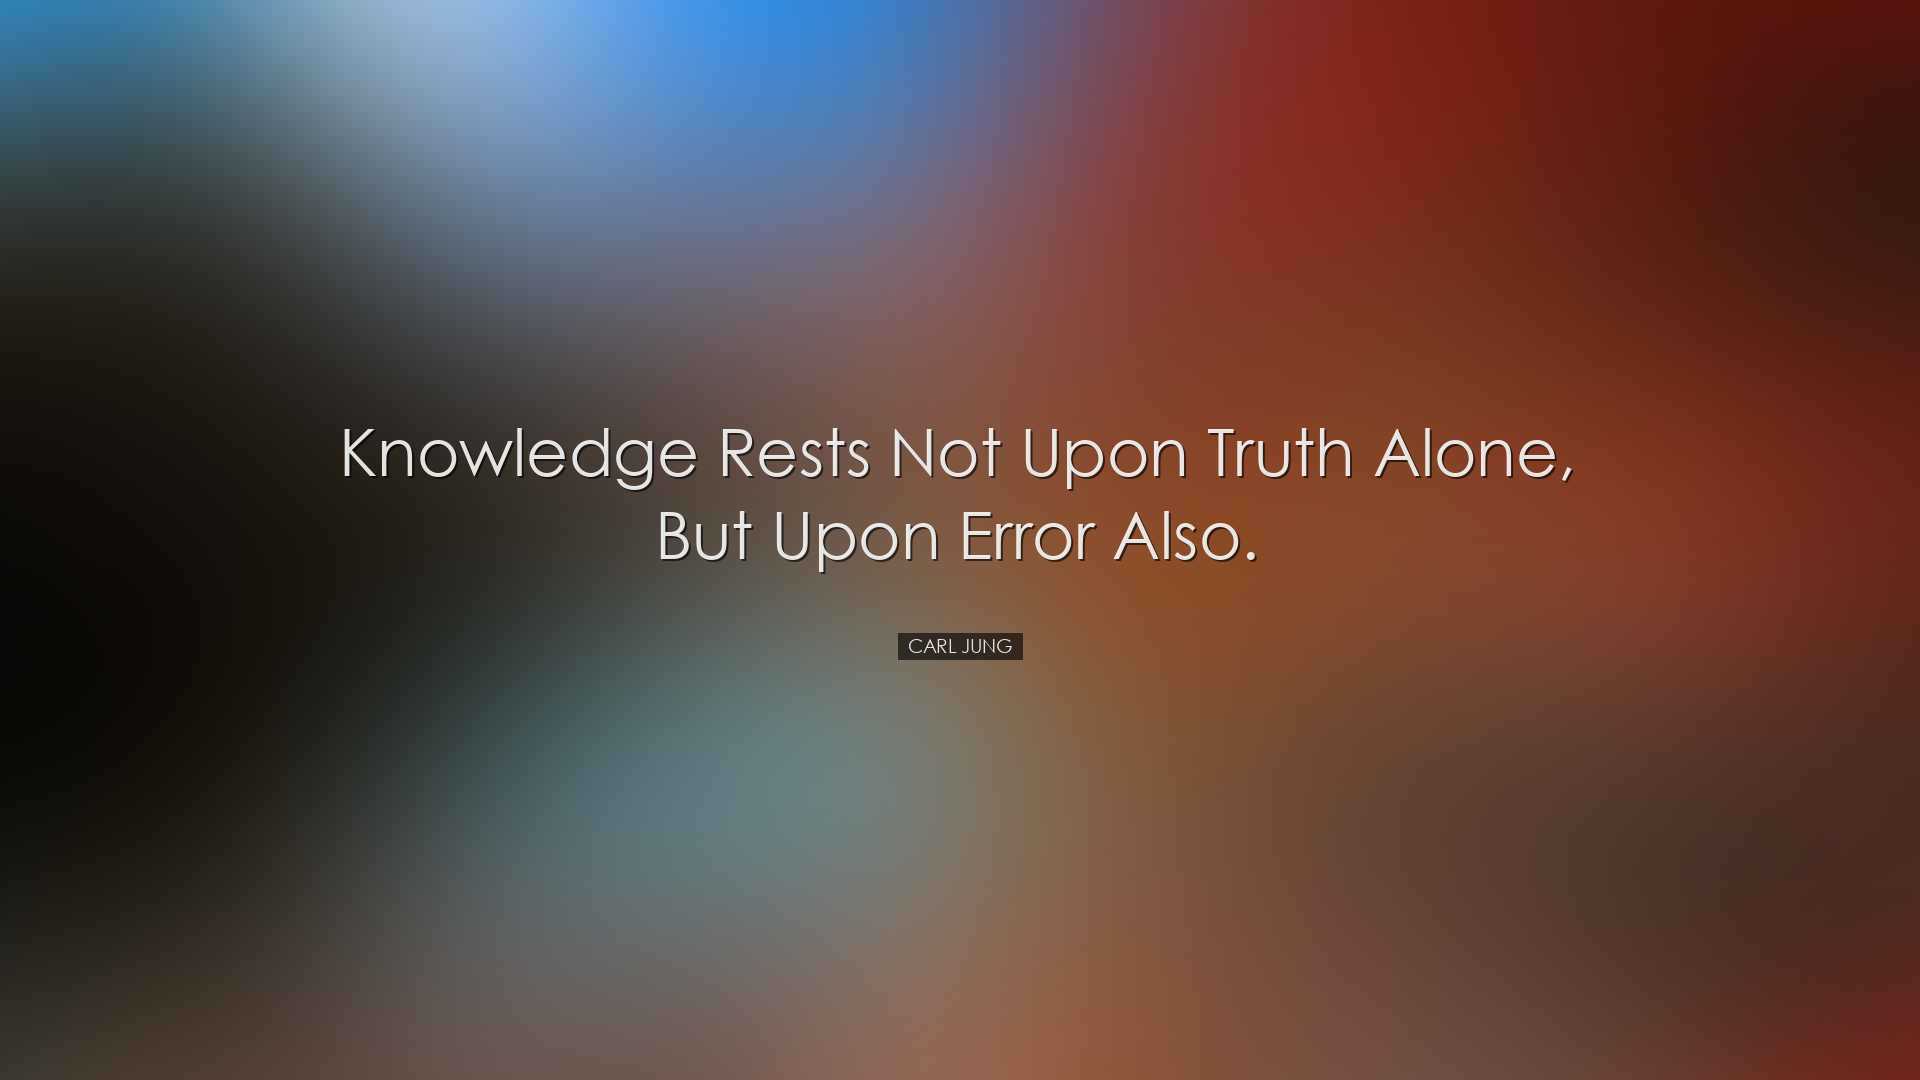 Knowledge rests not upon truth alone, but upon error also. - Carl